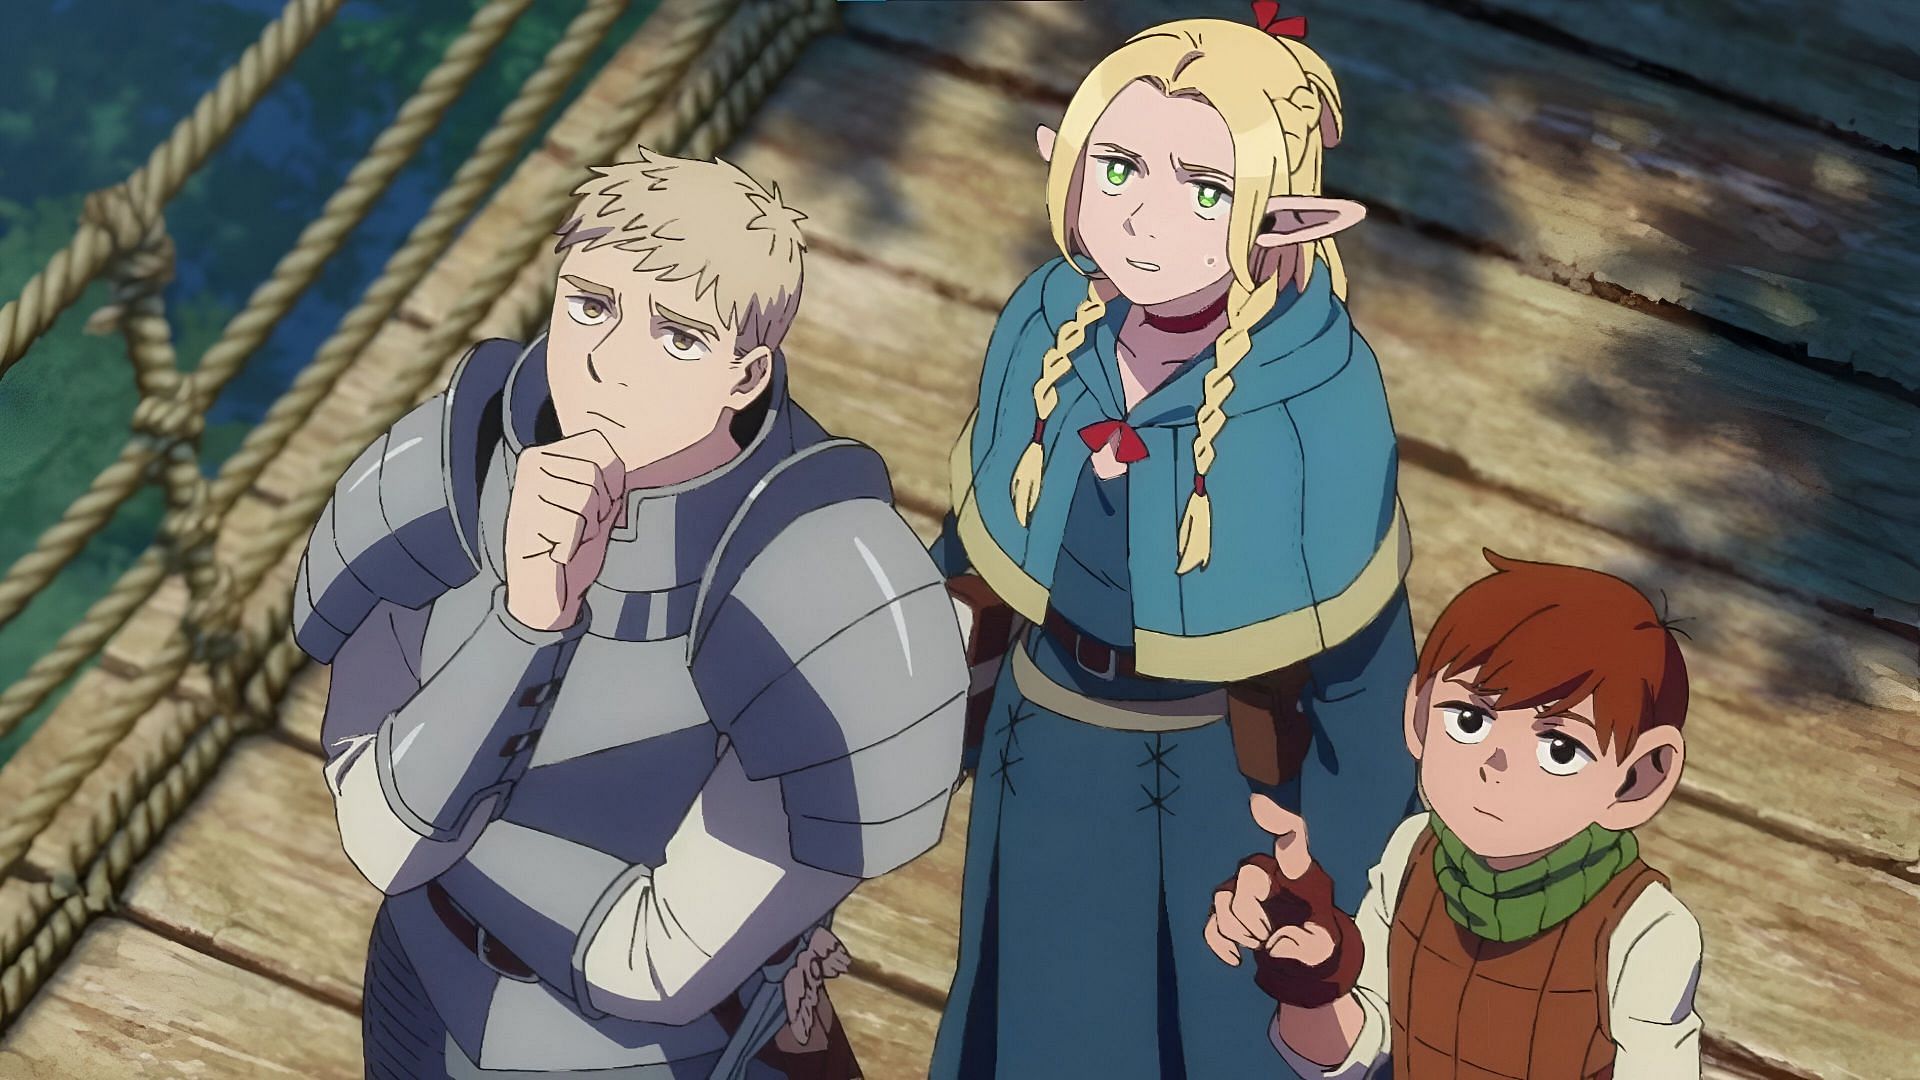 Laois (left), Marcille (middle), and Chilchuk (right) (Image via TRIGGER)